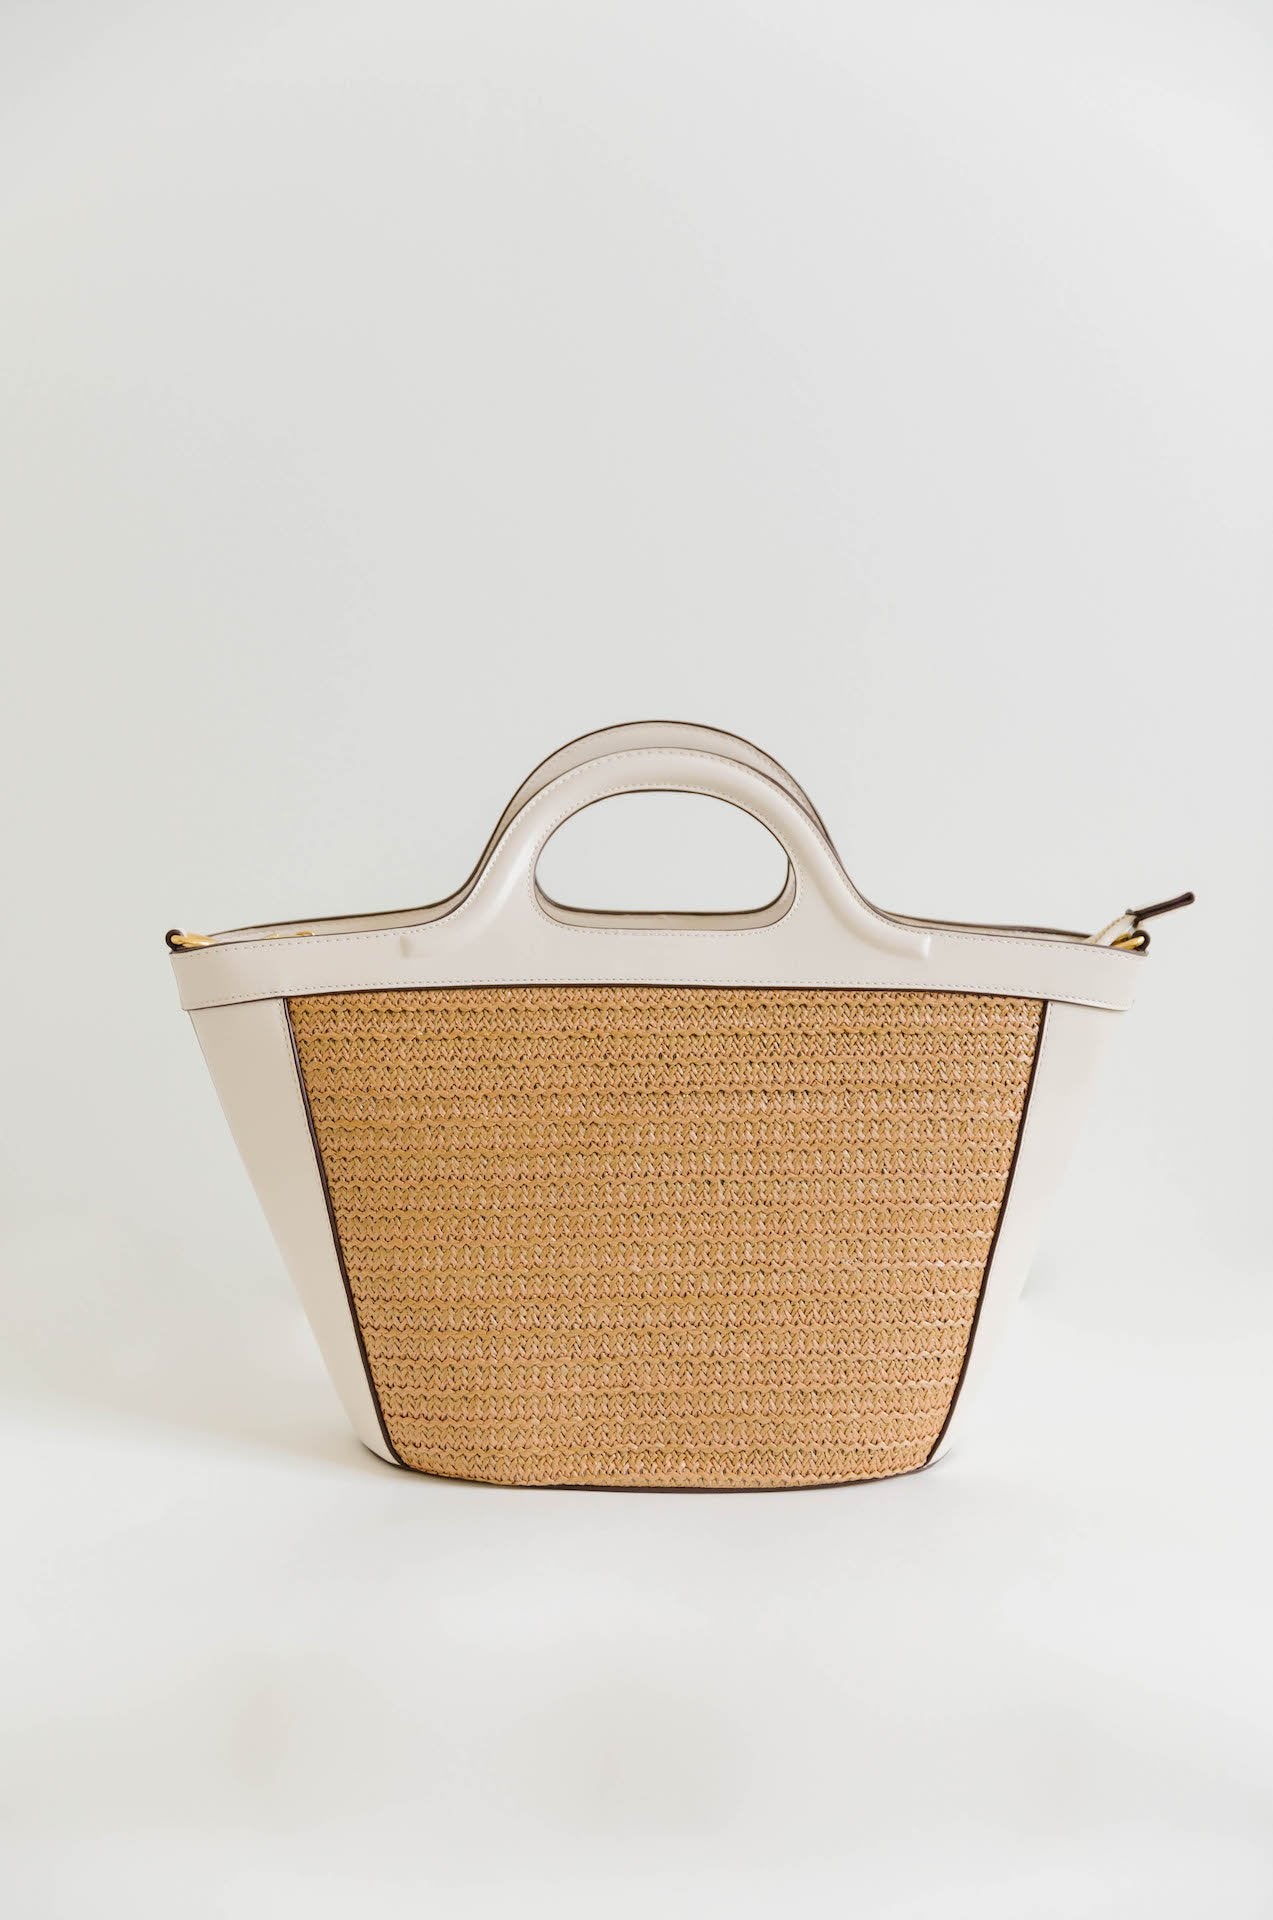 raffia wicker woven vegan leather spring and summer tote bag